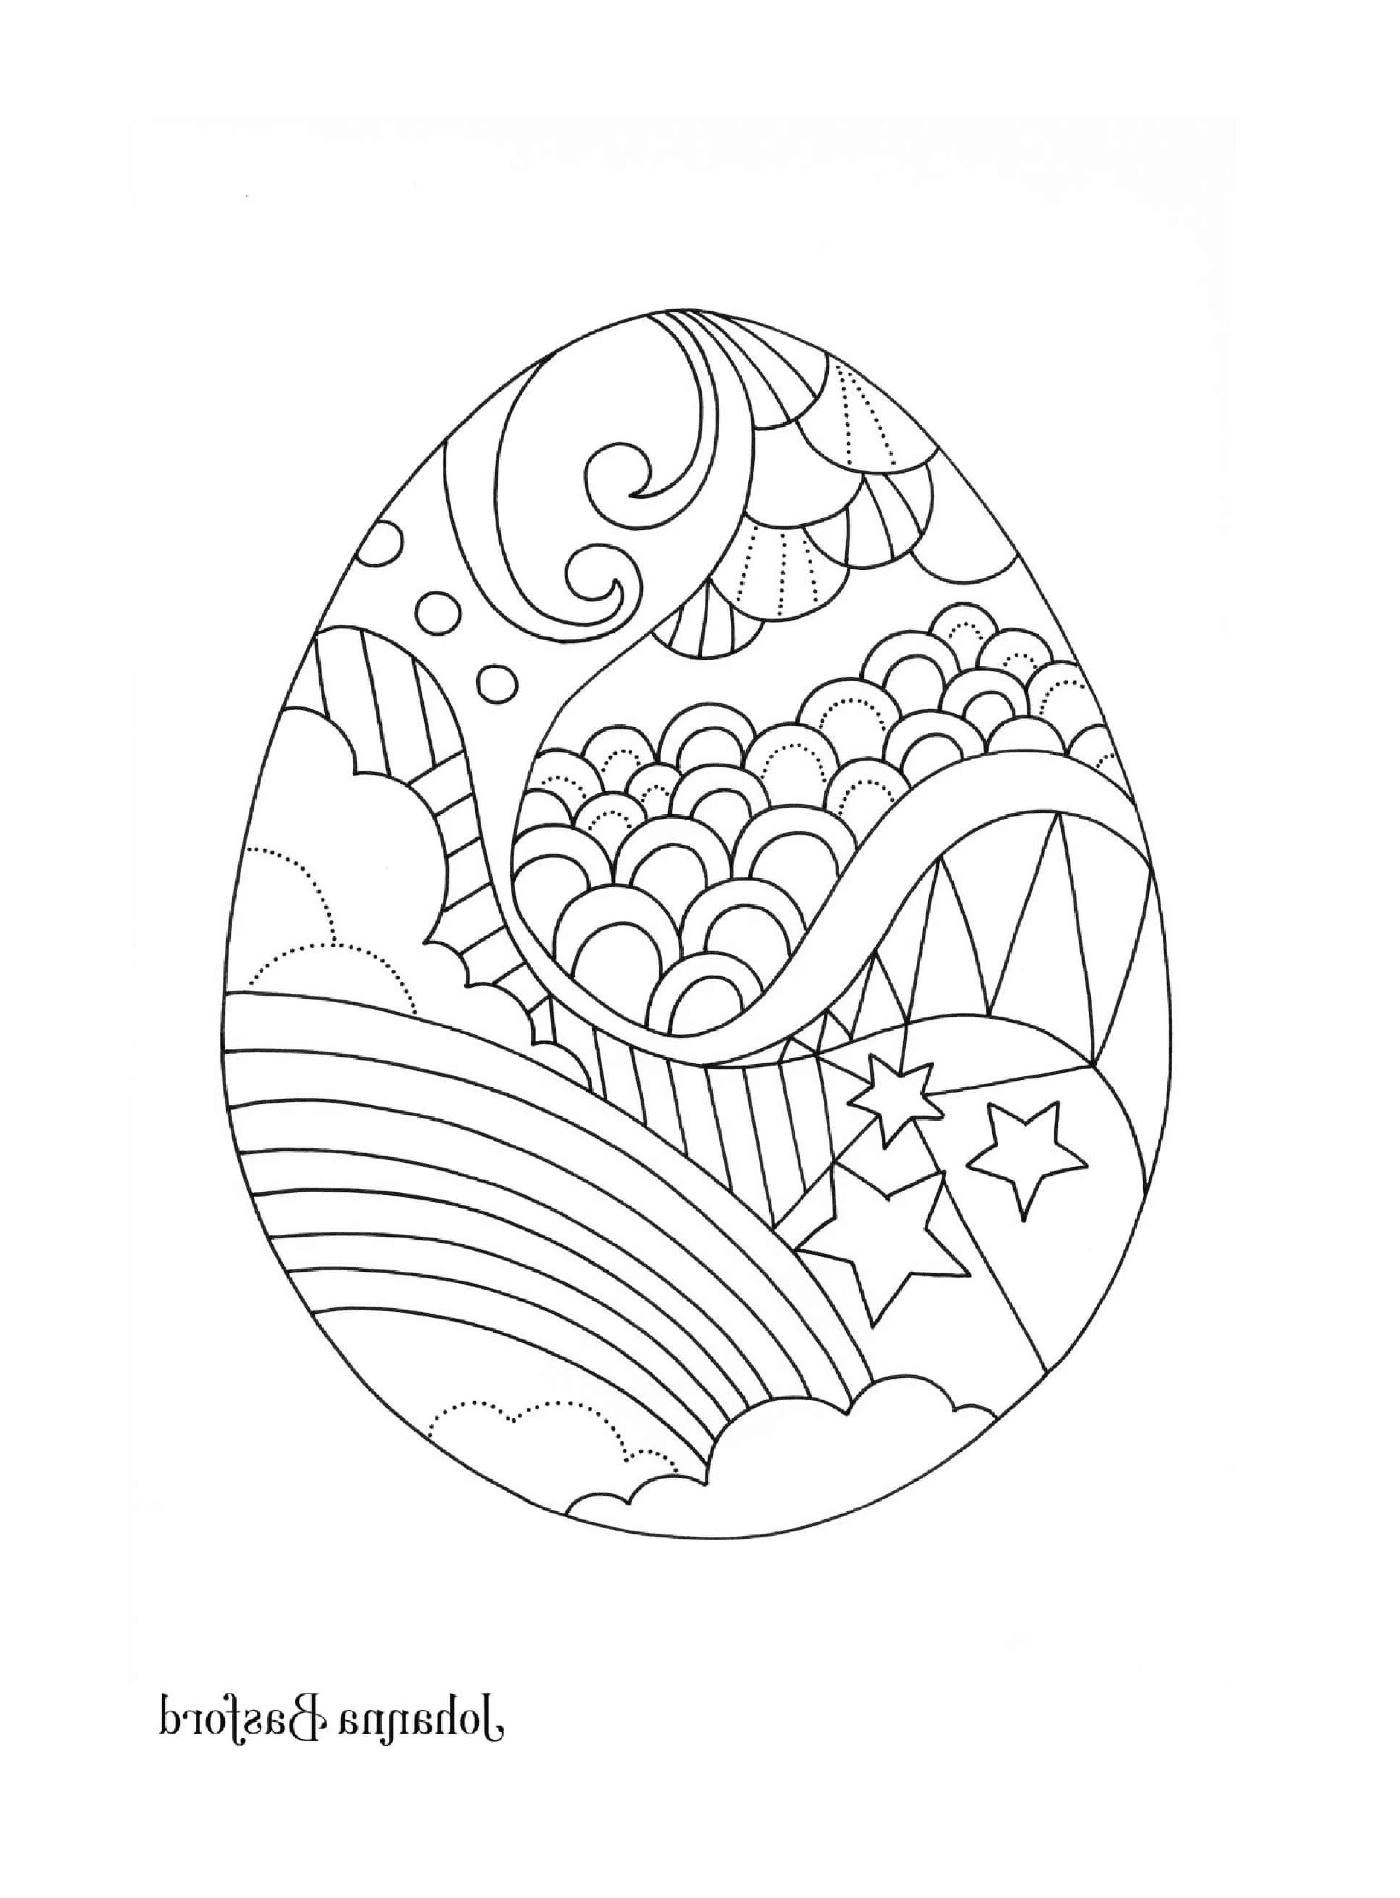  An Easter egg decorated with a rainbow, clouds, stars and other patterns 